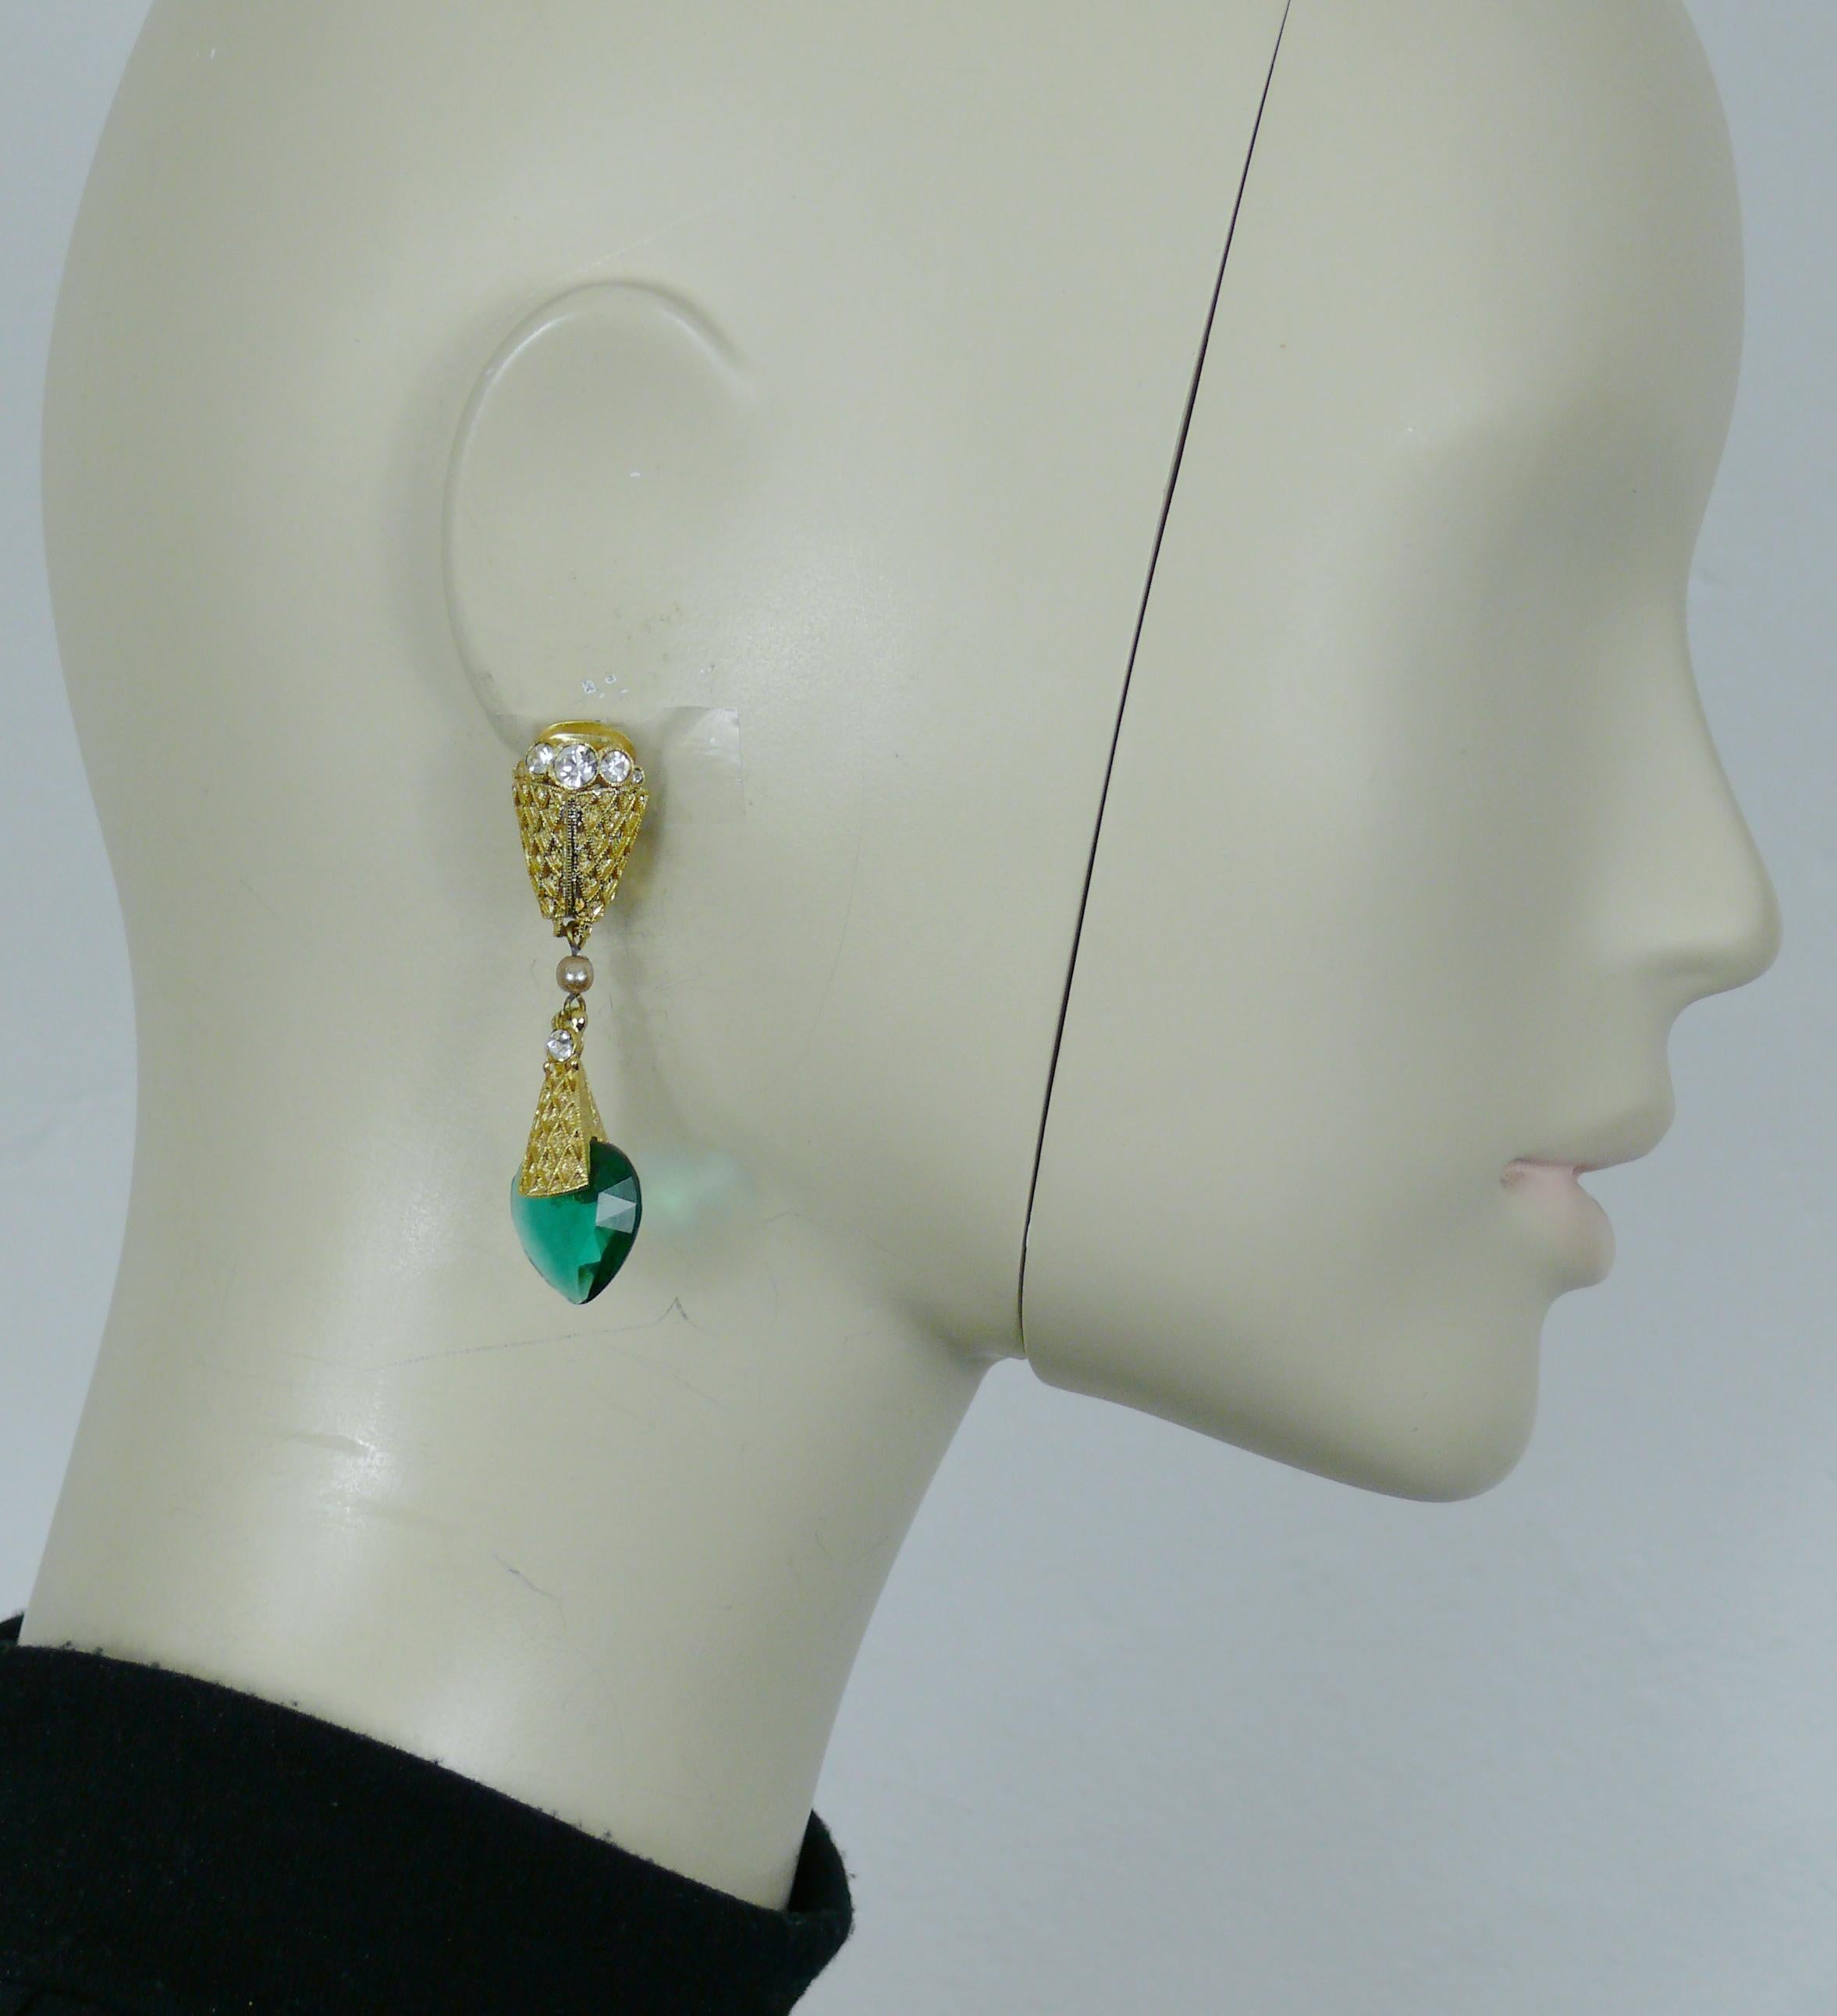 BALENCIAGA vintage gold tone dangling earrings (clip-on) earrings featuring a green facetted glass heart drop, faux pearl and clear crystals.

Embossed with the monogram BB PARIS.

Indicative measurements : height approx. 5.6 cm (2.20 inches) / max.